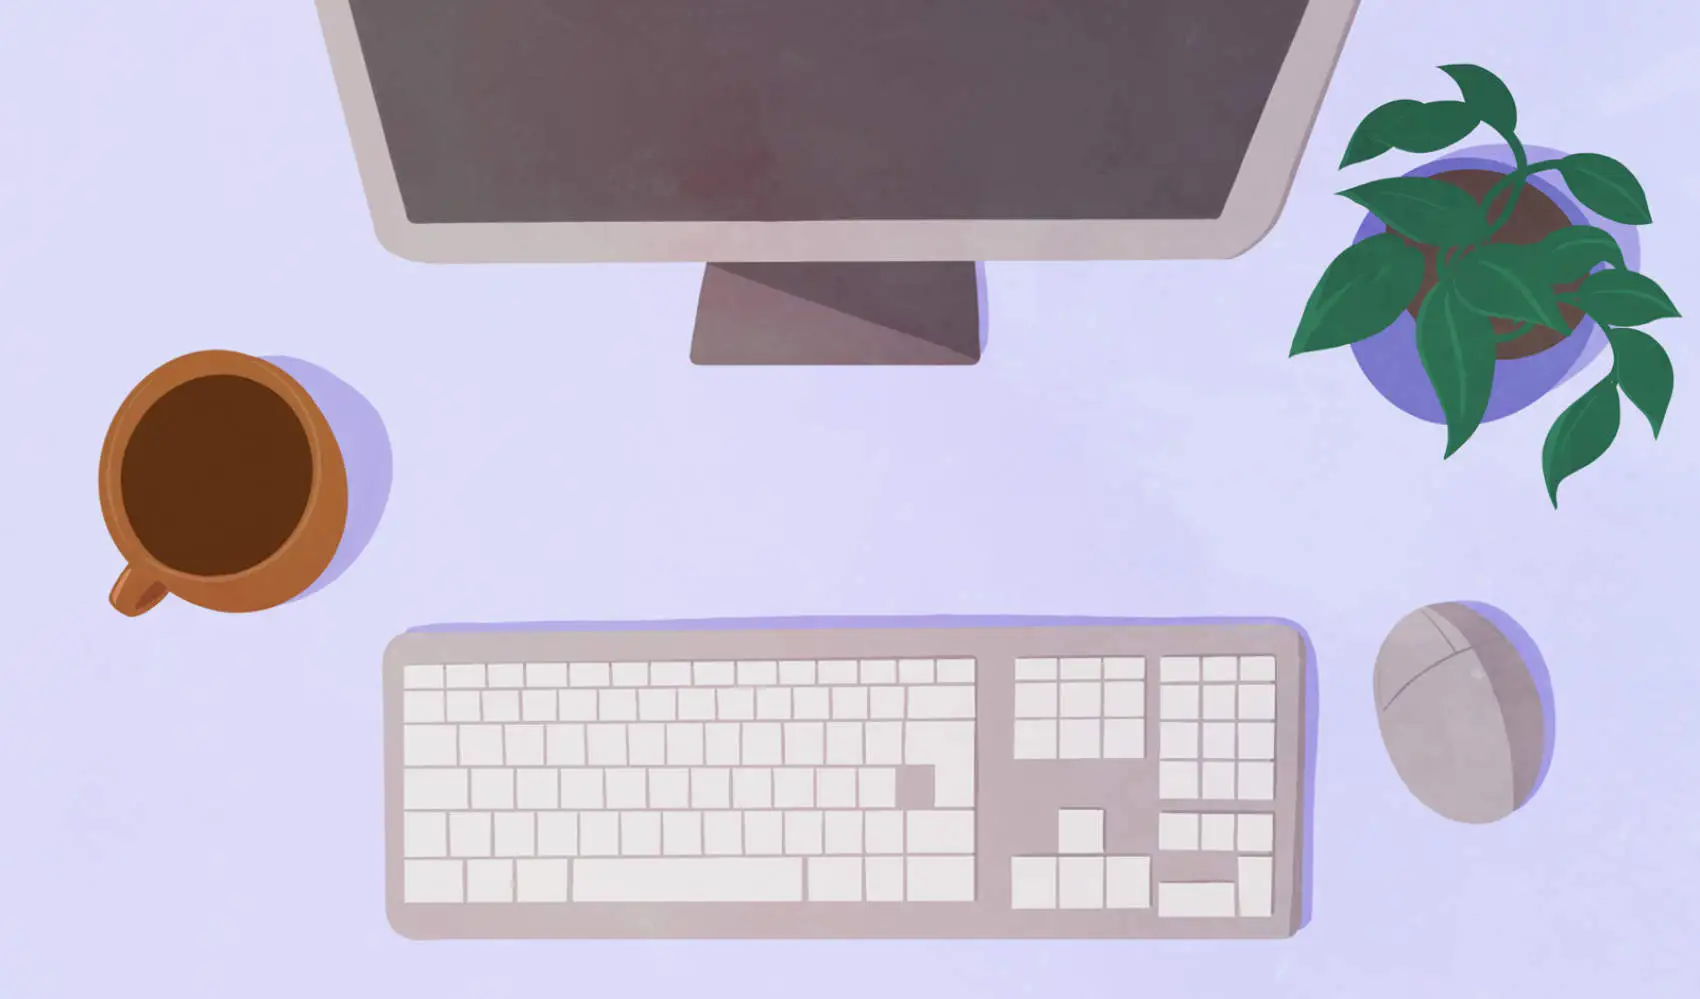 Overhead view of a keyboard, monitor, mouse, cup of coffee, and small potted plant.